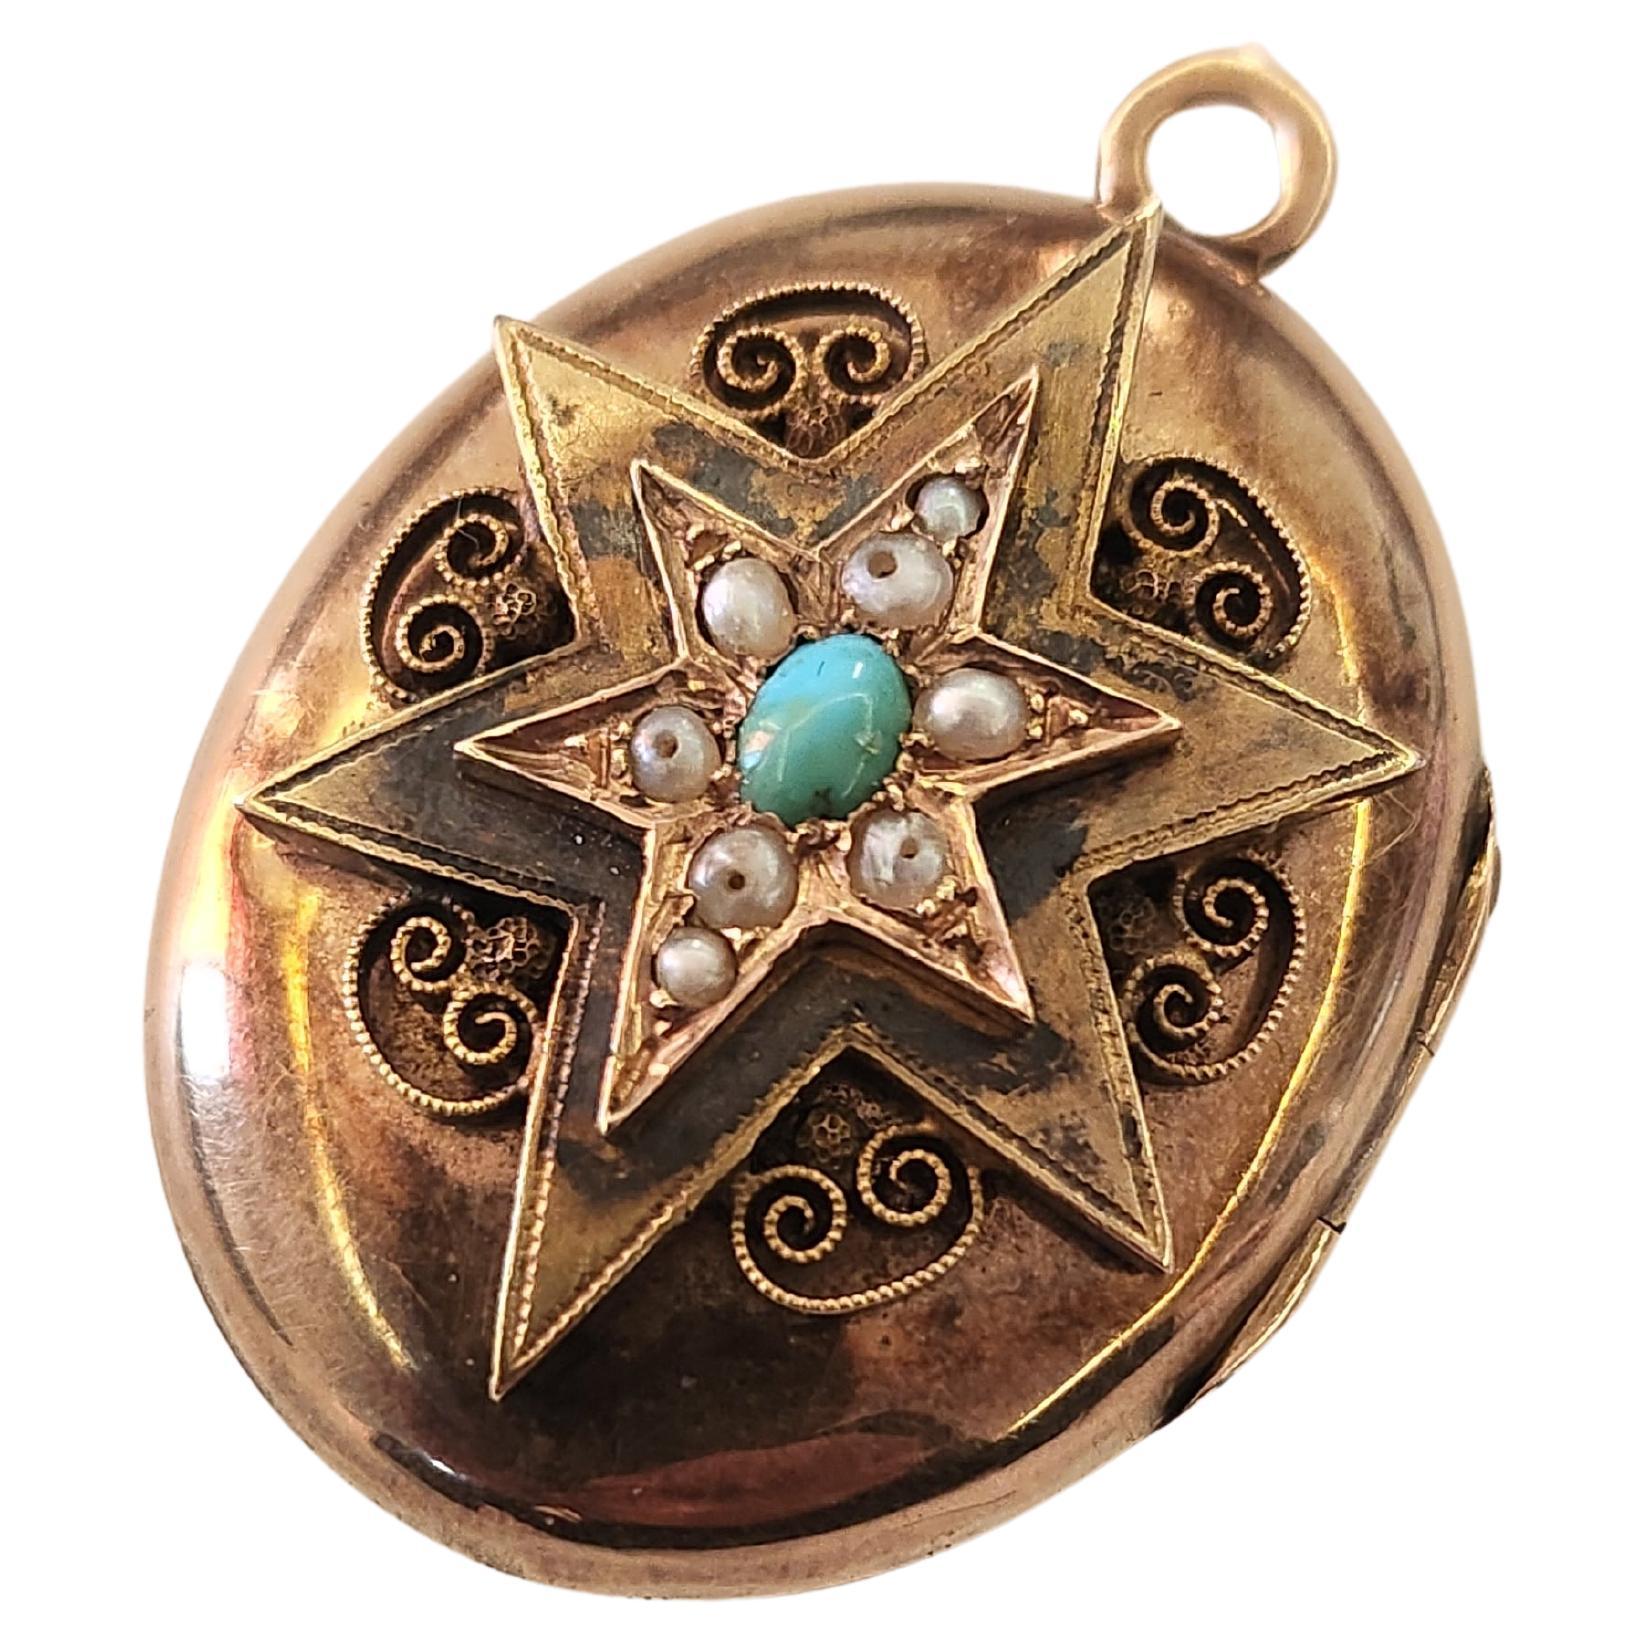 Antique large russian locket pendant in 14k gold centered with a star design decorted with natural sead pearls and natural light blue terquoise stone pendant was made during the imperial russian era 1833.c with total gold weight of 17 grams and 4cm